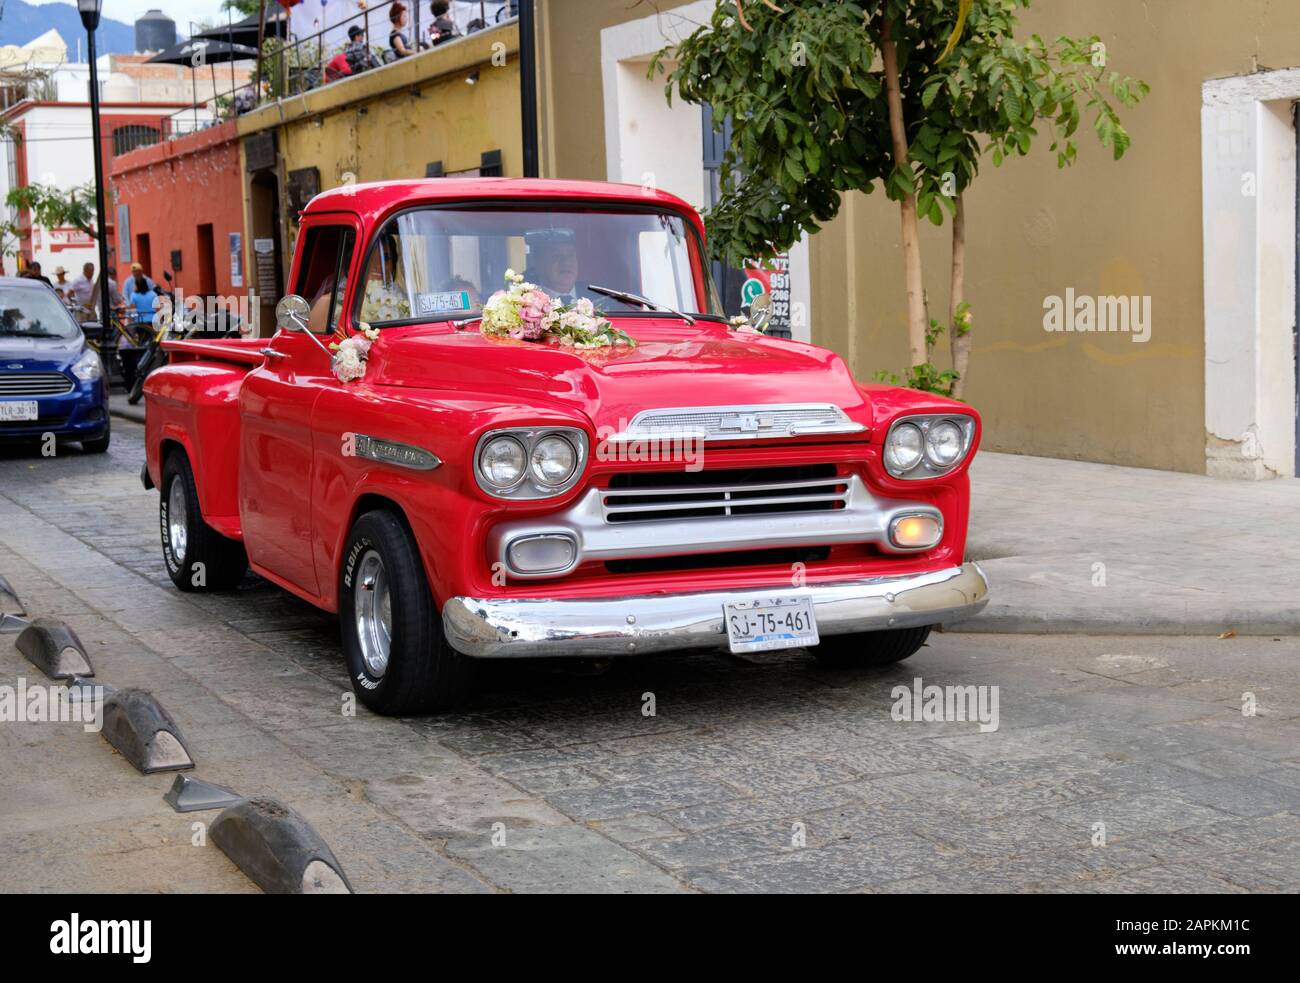 Red Chevrolet Apache truck, part of wedding party, on the street old colonial old town Oaxaca, Mexico Stock Photo